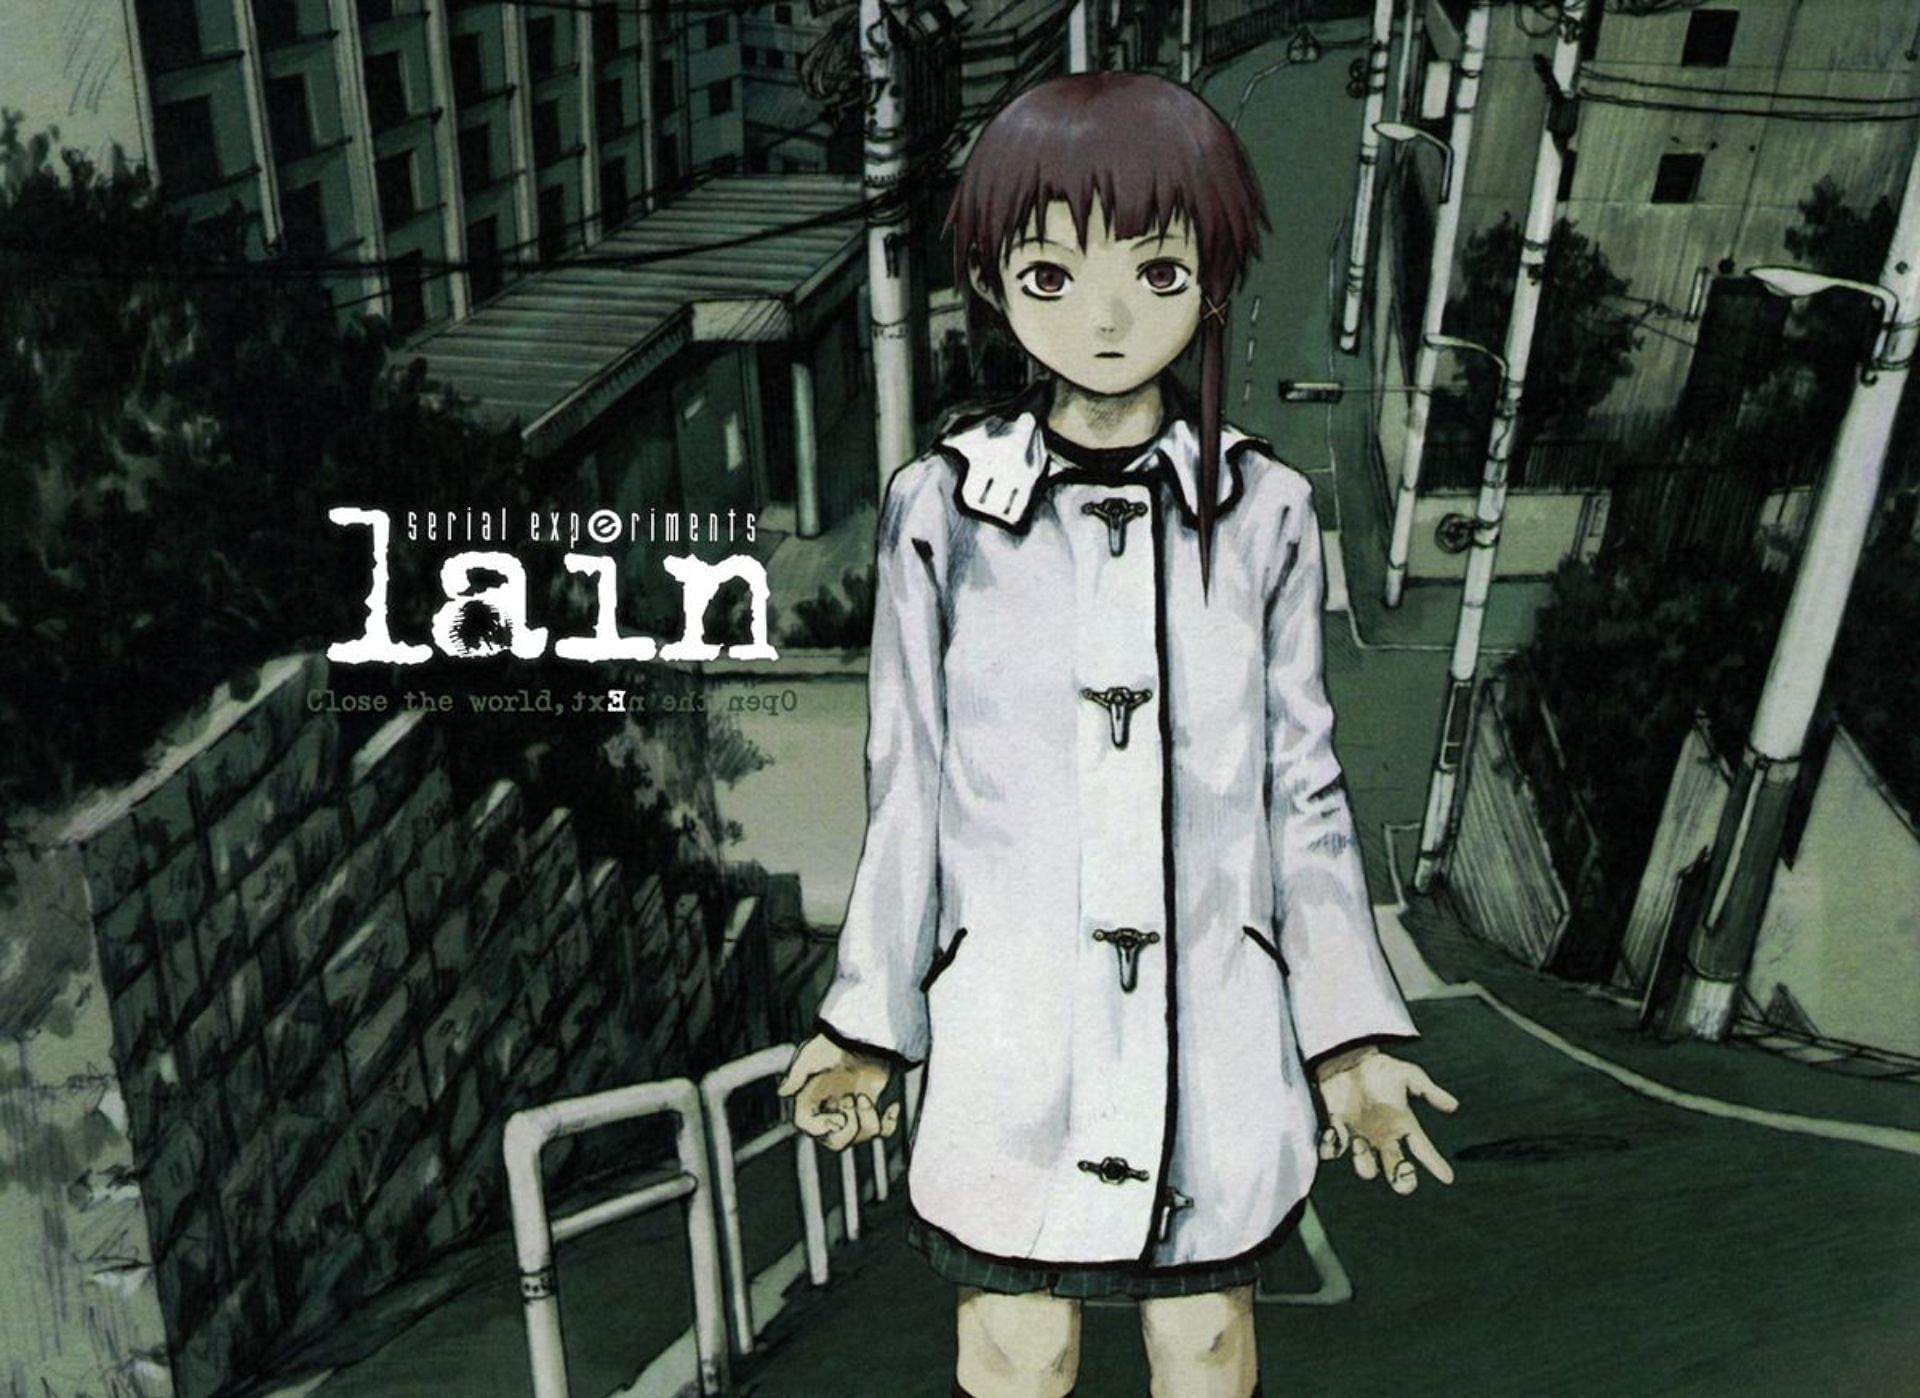 Serial Experiments Lain anime announces an Alternate Reality Game